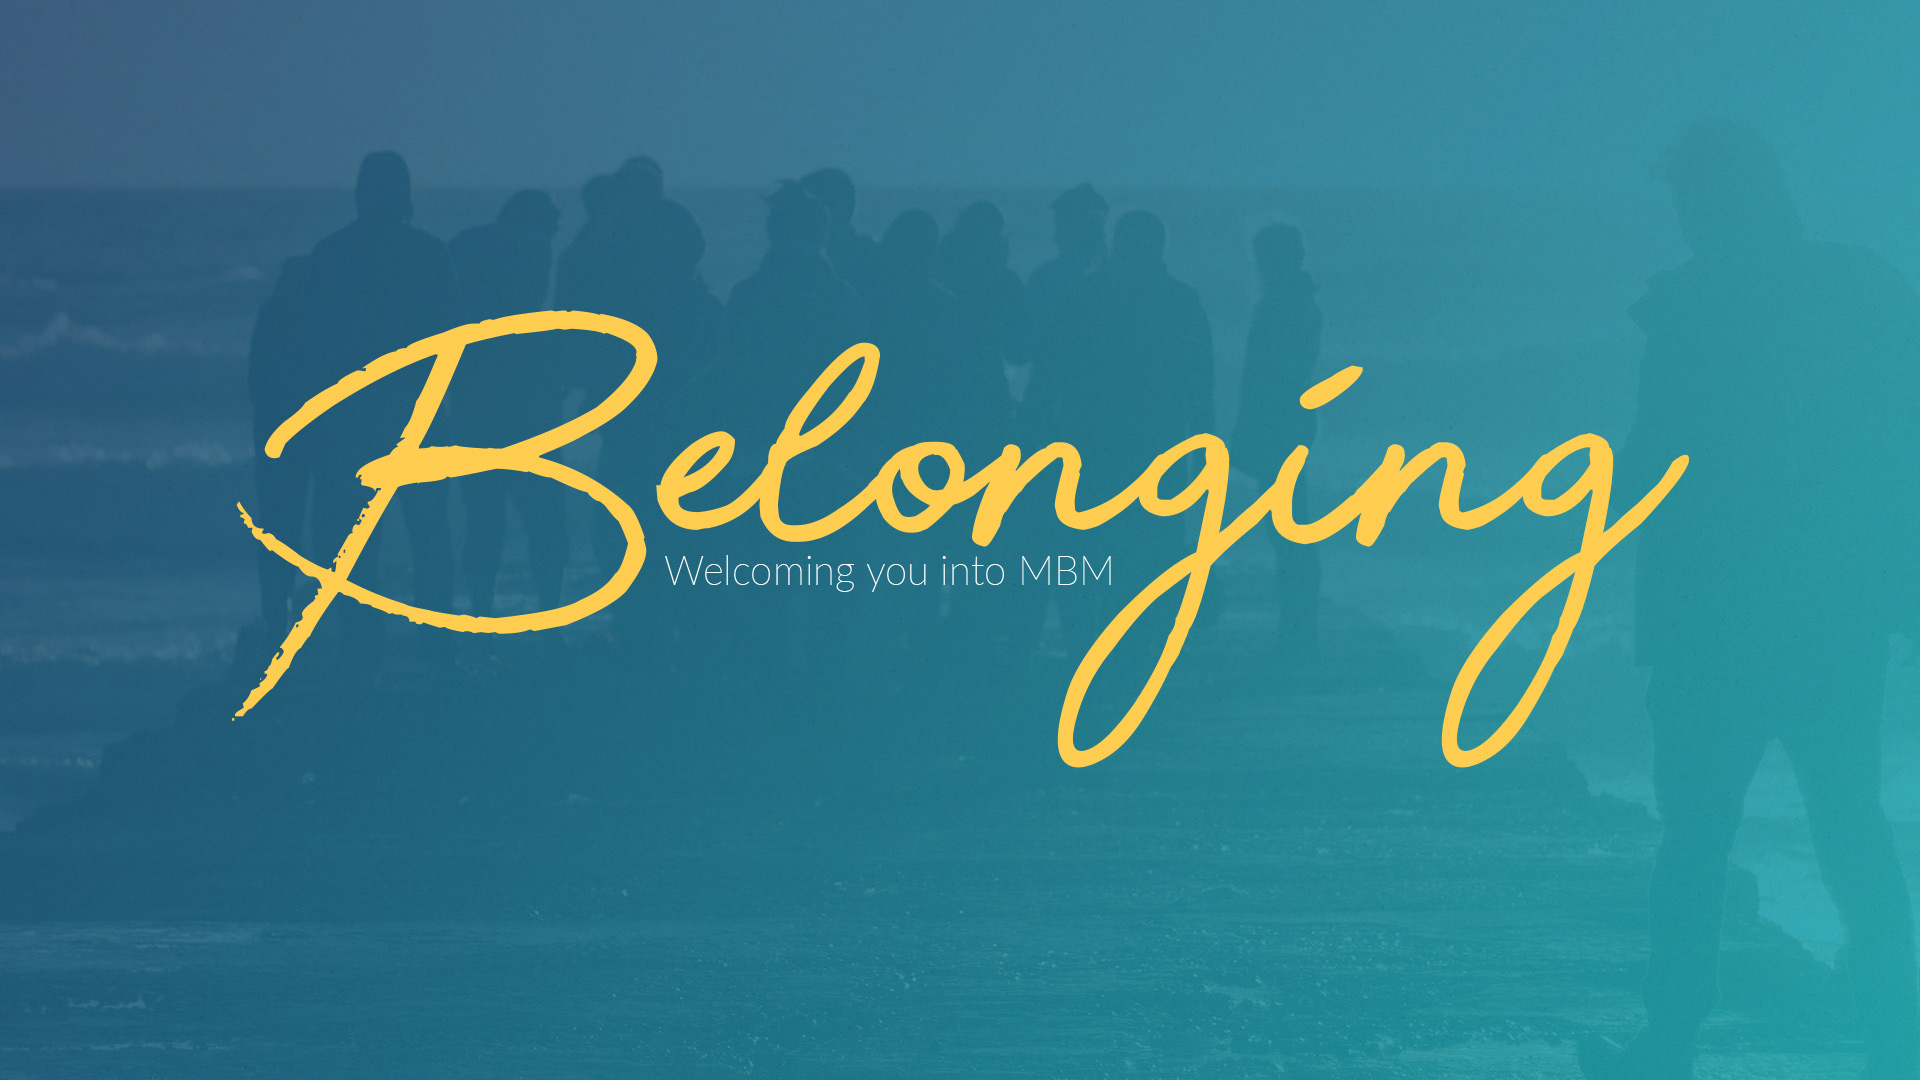 What’s On MBM // Multicultural Bible Ministry. A church for all nations.